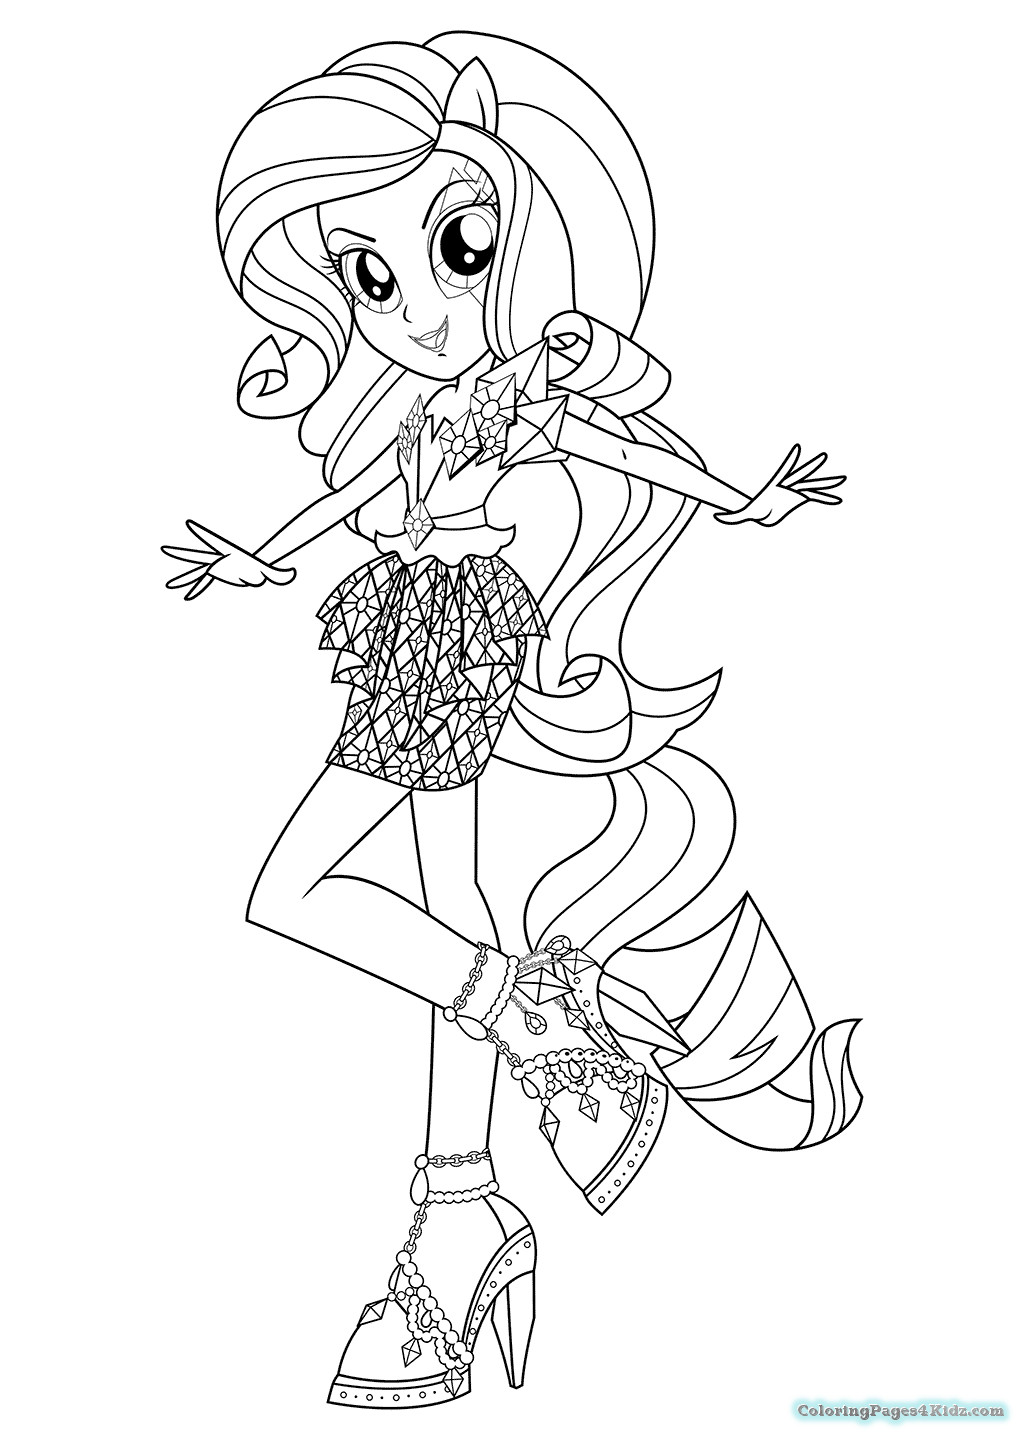 Equestria Girls Rarity Coloring Pages
 Equestria Girls Rainbow Rocks Coloring Pages